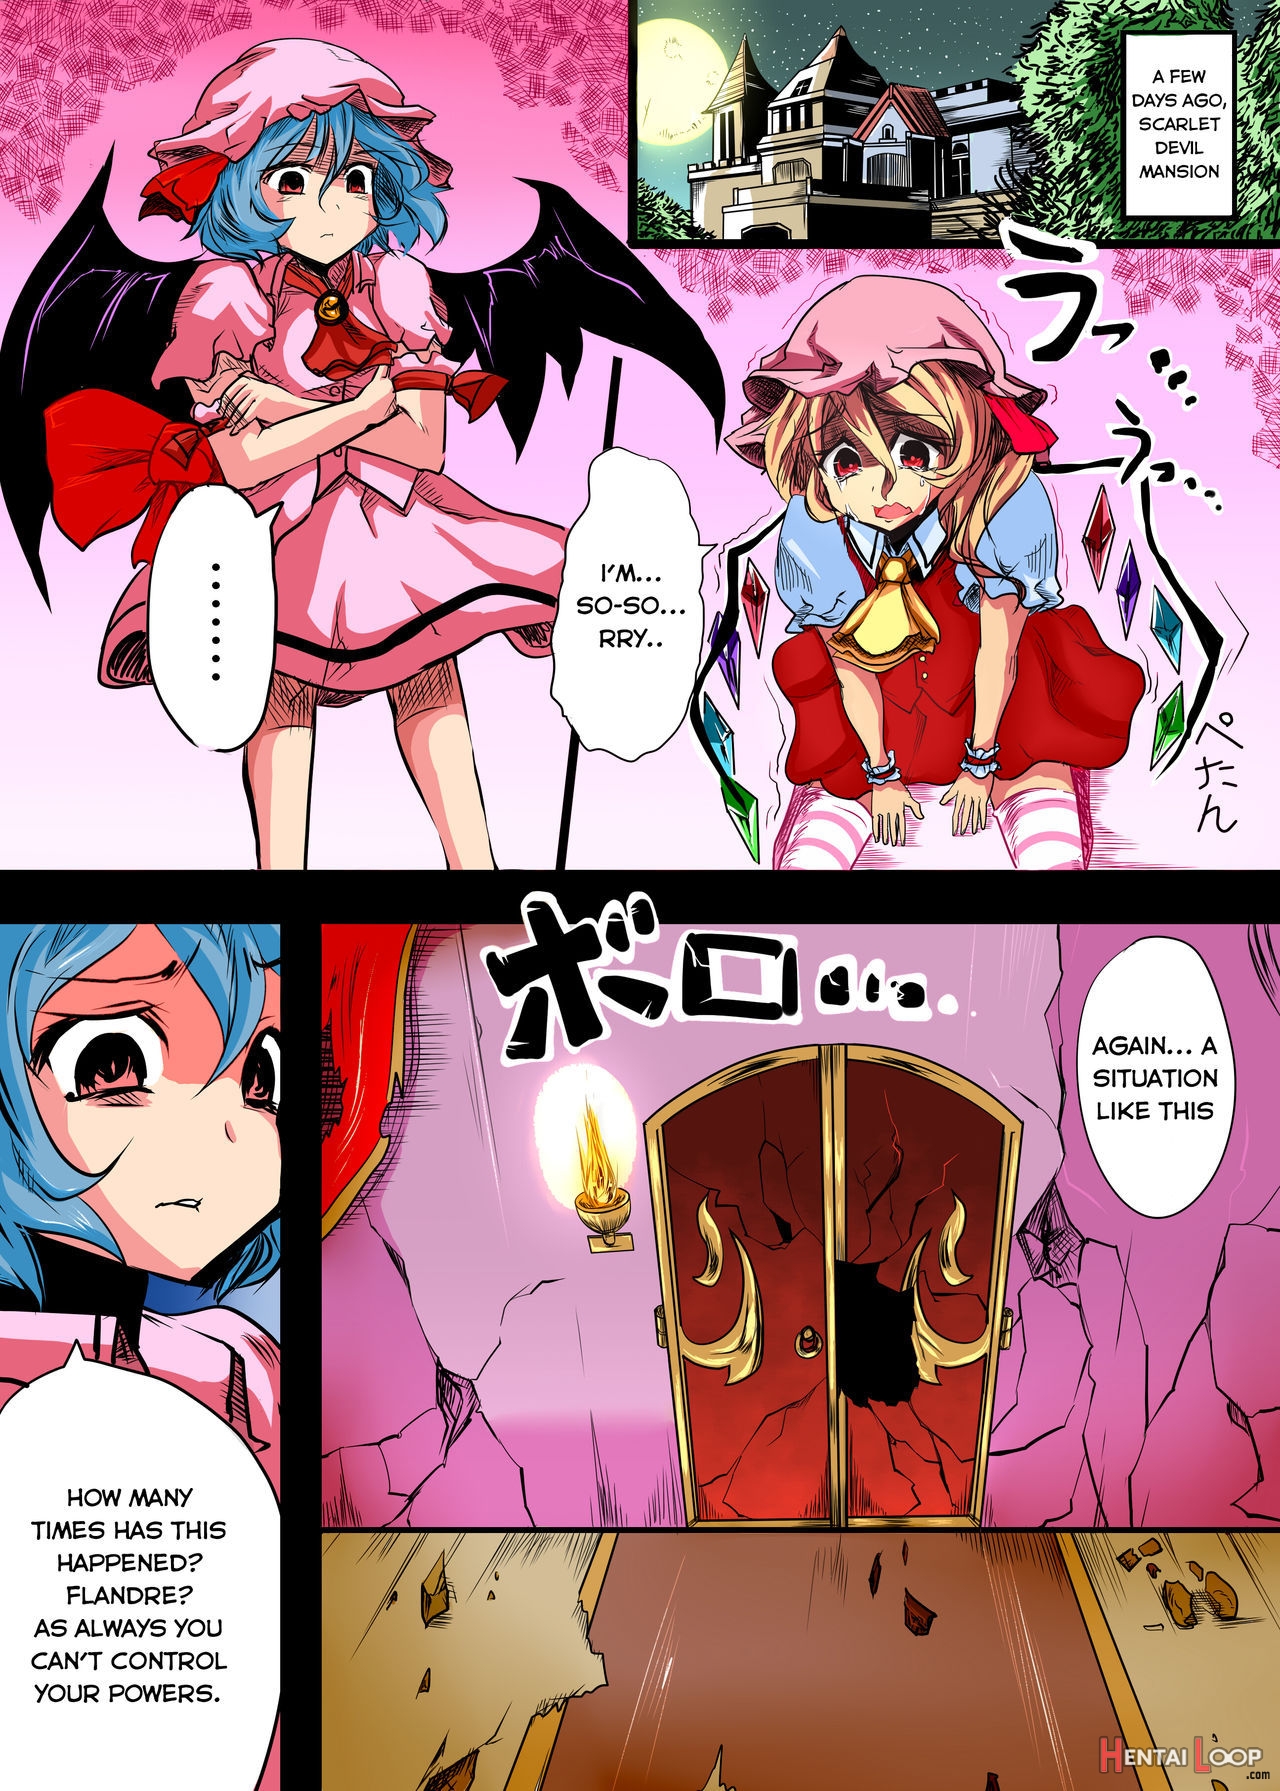 The Flandre Getting Beaten Up And Raped By A Fat Man Book page 5